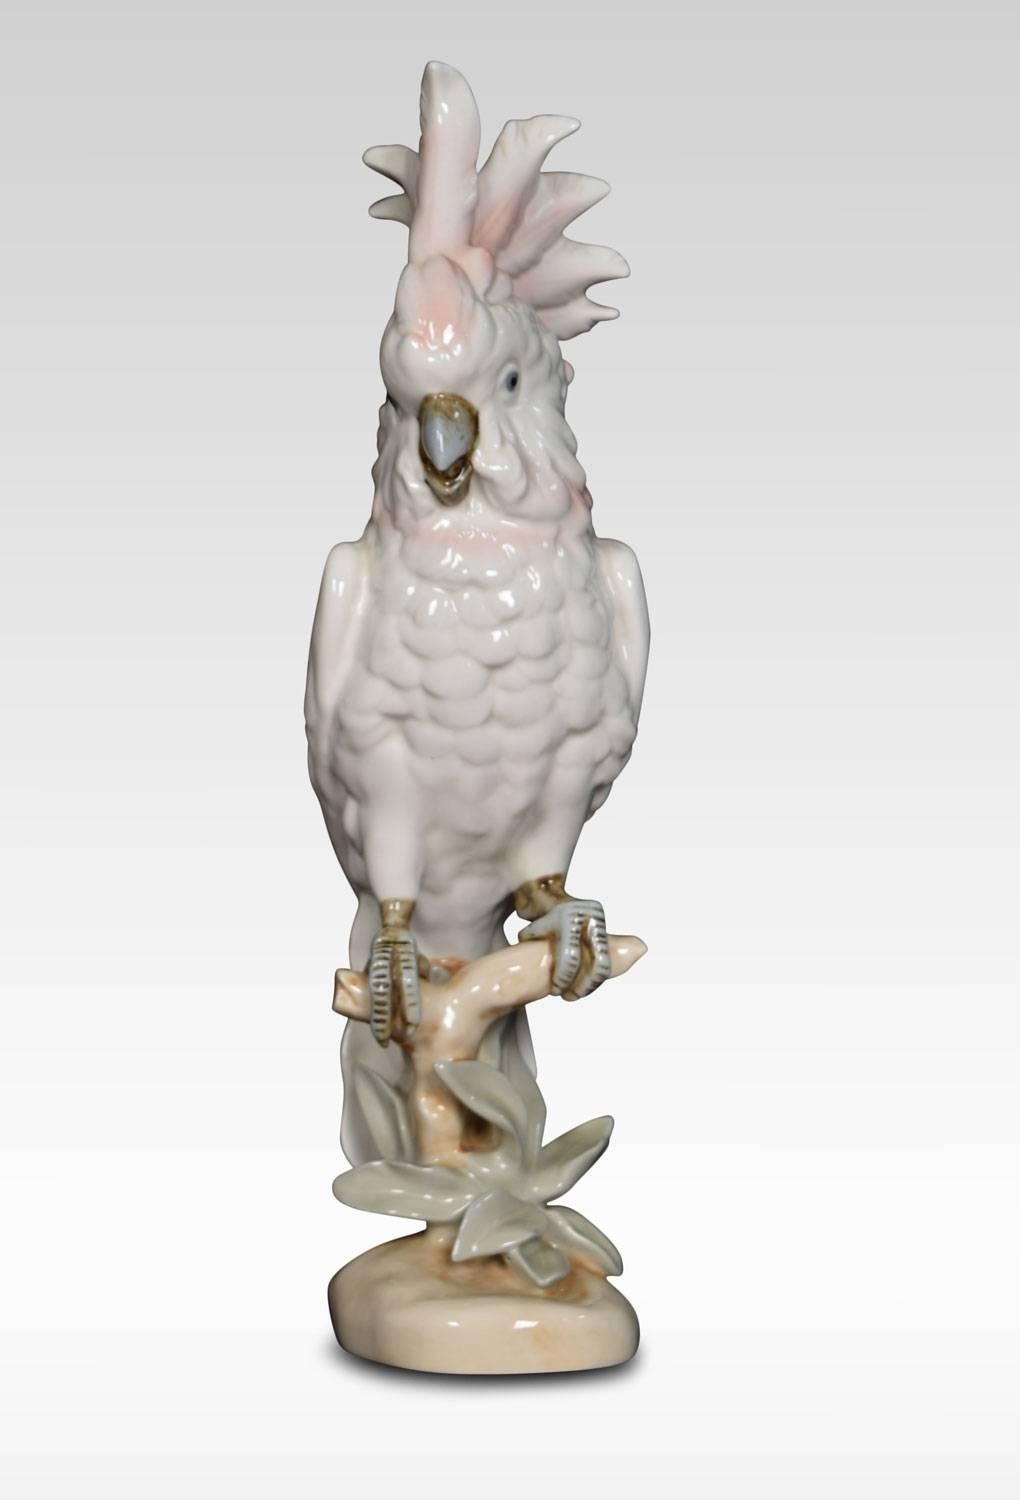 Mid-20th century Royal Dux porcelain figure of a cockatoo. The cockatoo is displaying it’s crest and is sitting on a branch with flowers underneath. The bottoms marked with all the appropriate Royal Dux insignia.
Dimensions:
Height 16.5